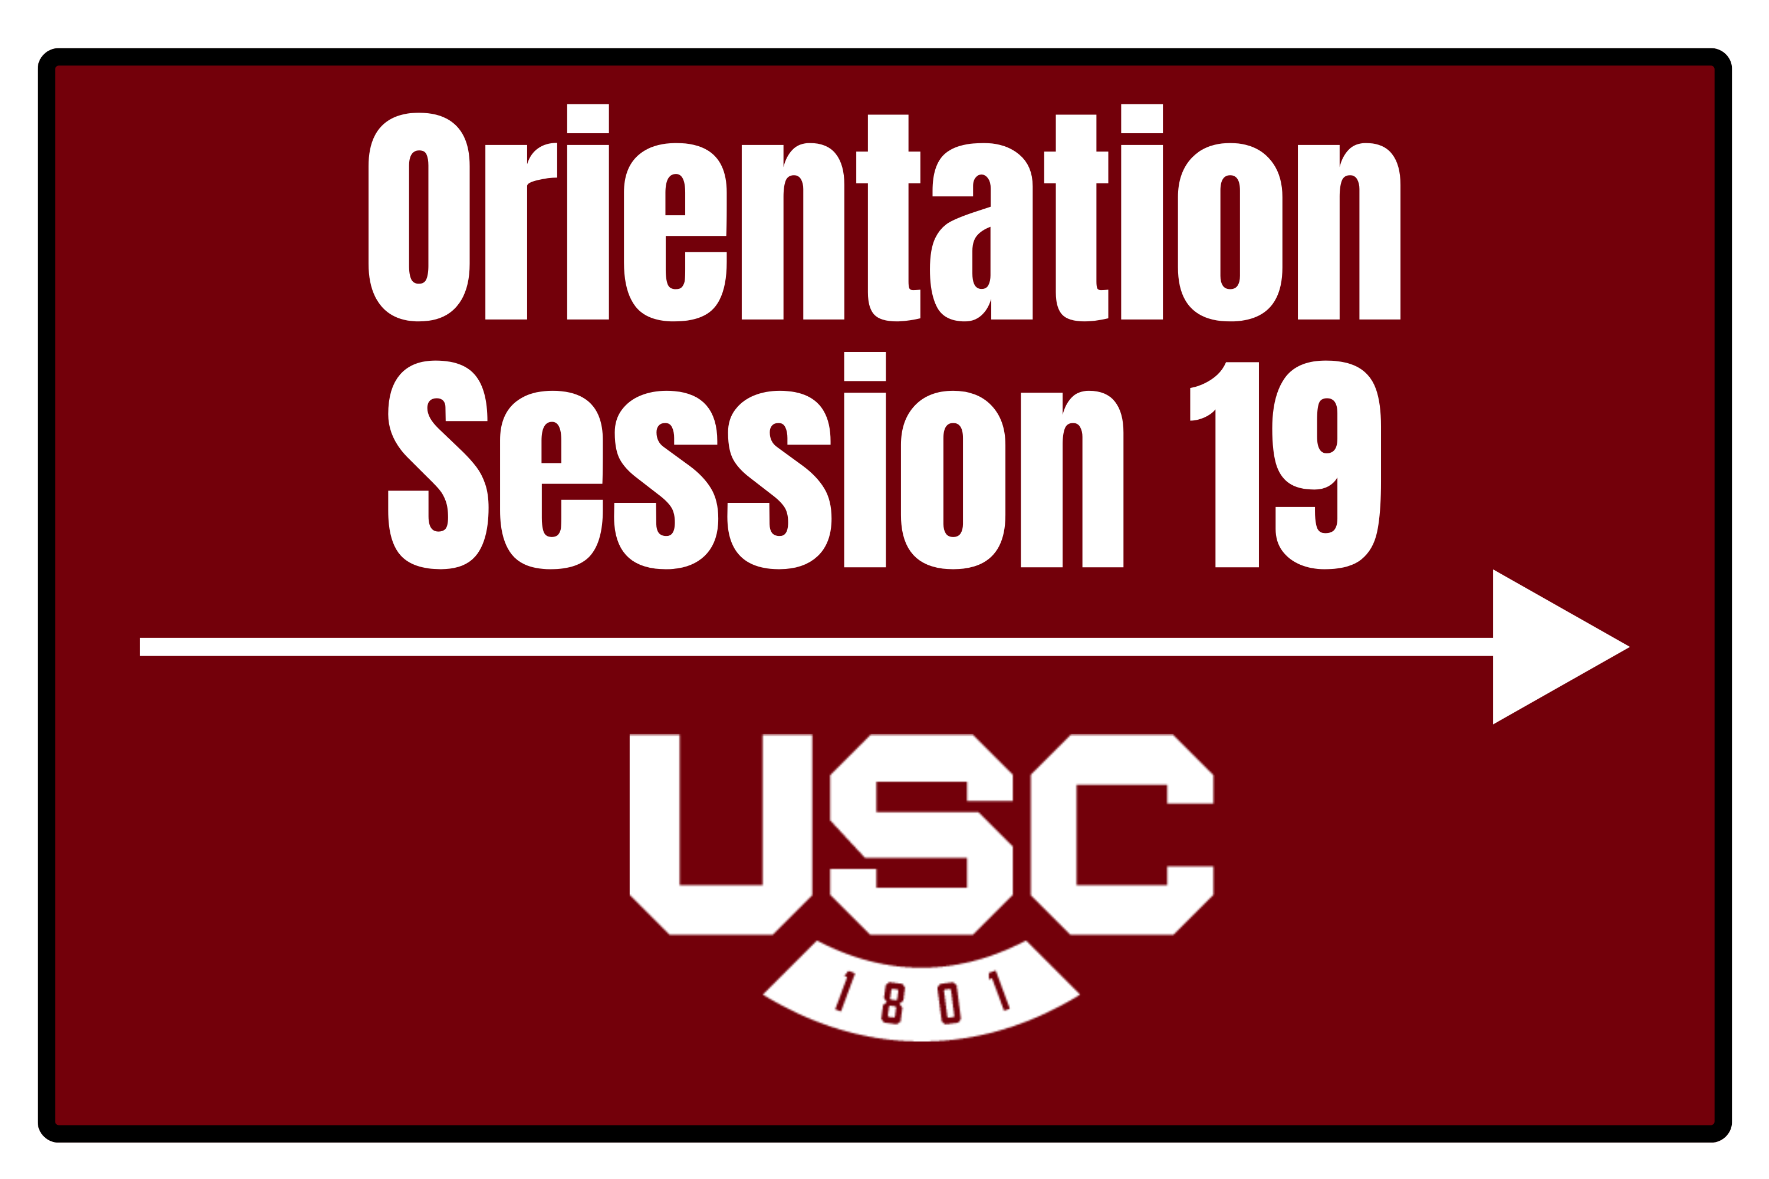 Orientation Session: 19: July 31 - August 1